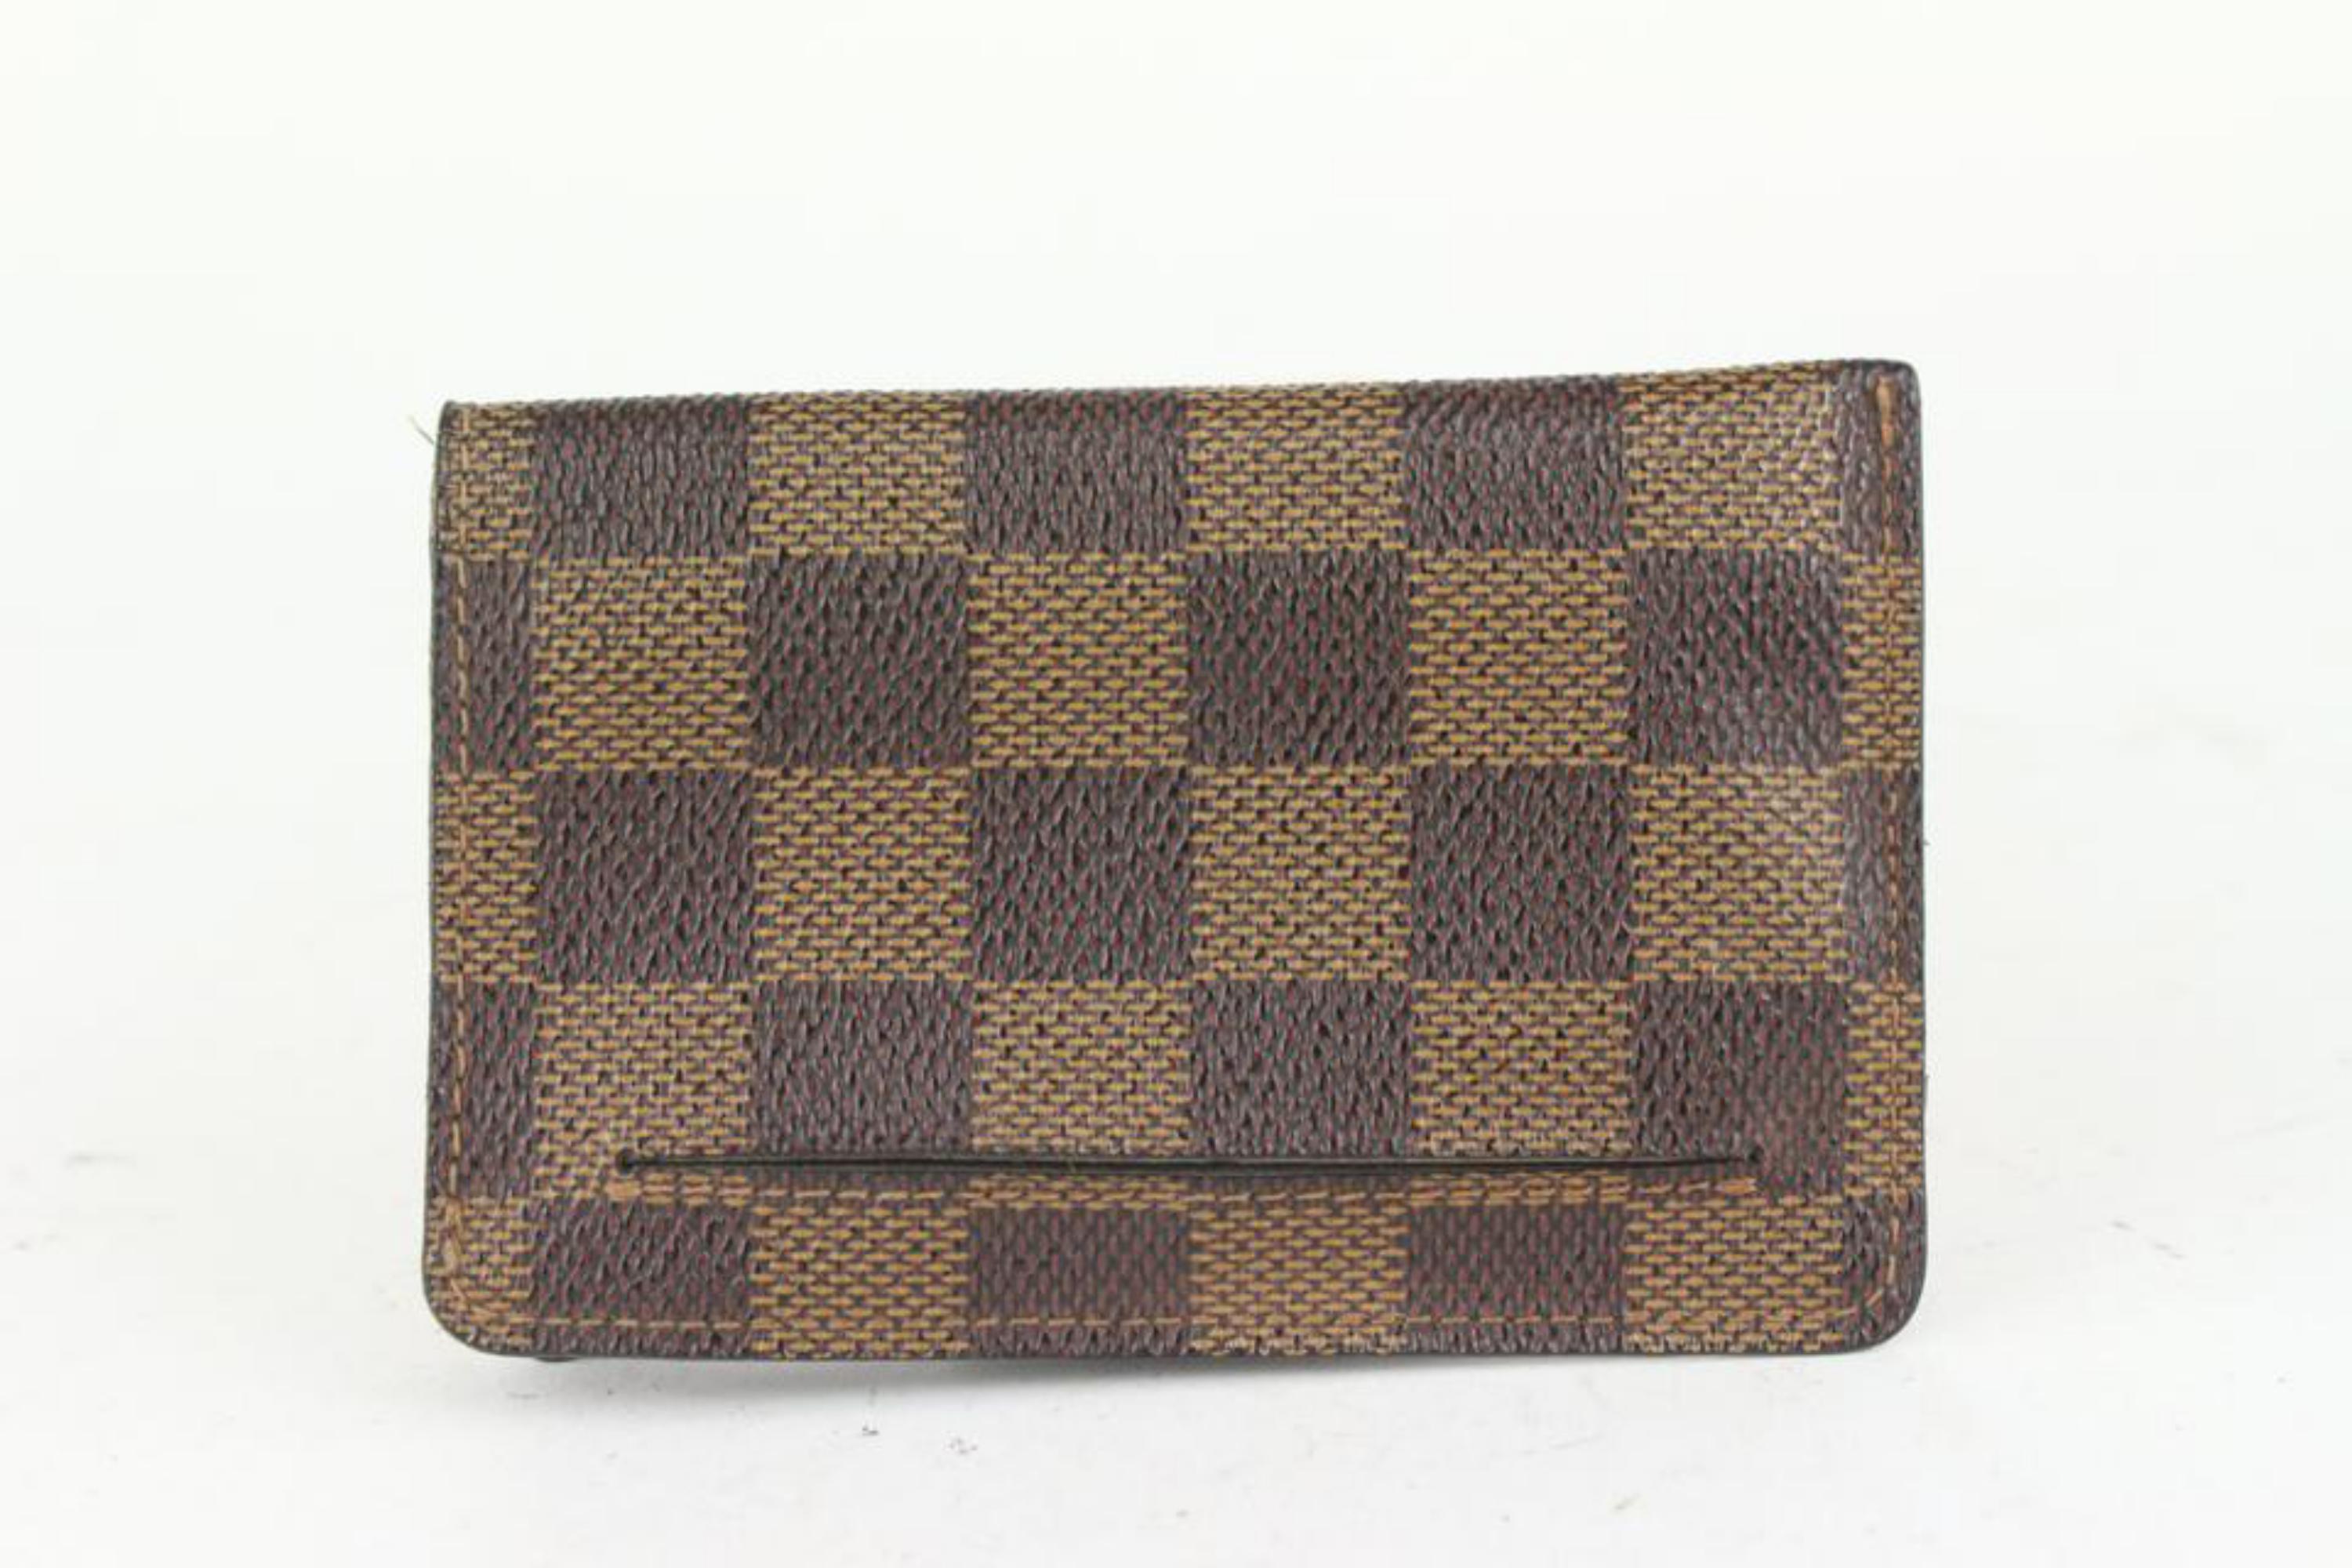 Louis Vuitton Damier Ebene Flap Key Pouch 1020lv42 In Good Condition For Sale In Dix hills, NY